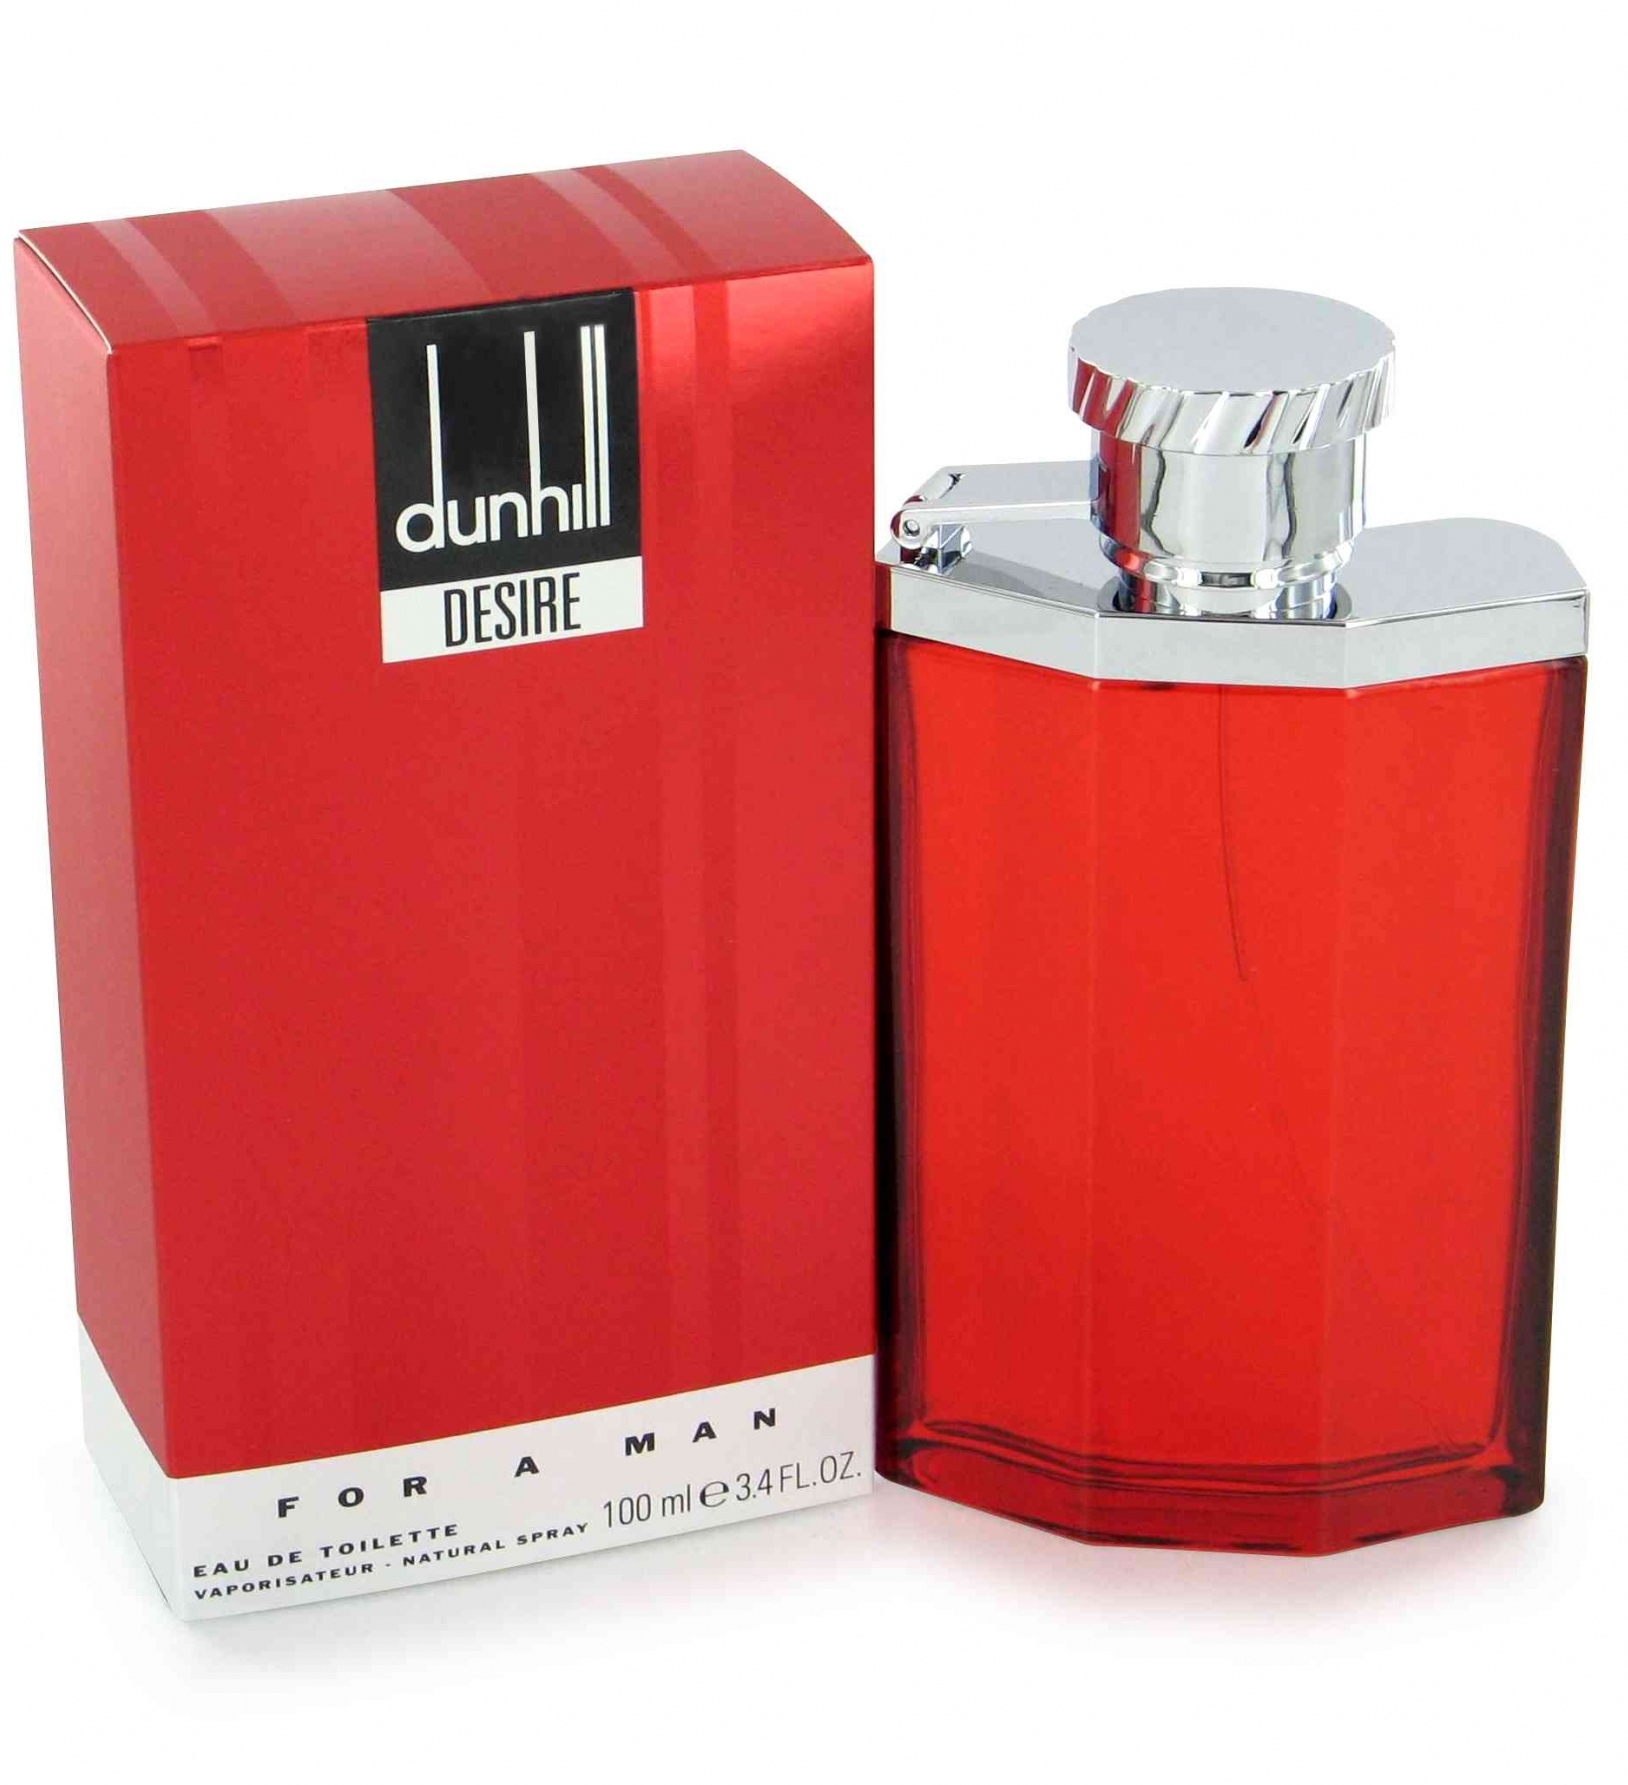 ALFRED DUNHILL DESIRE FOR A MAN